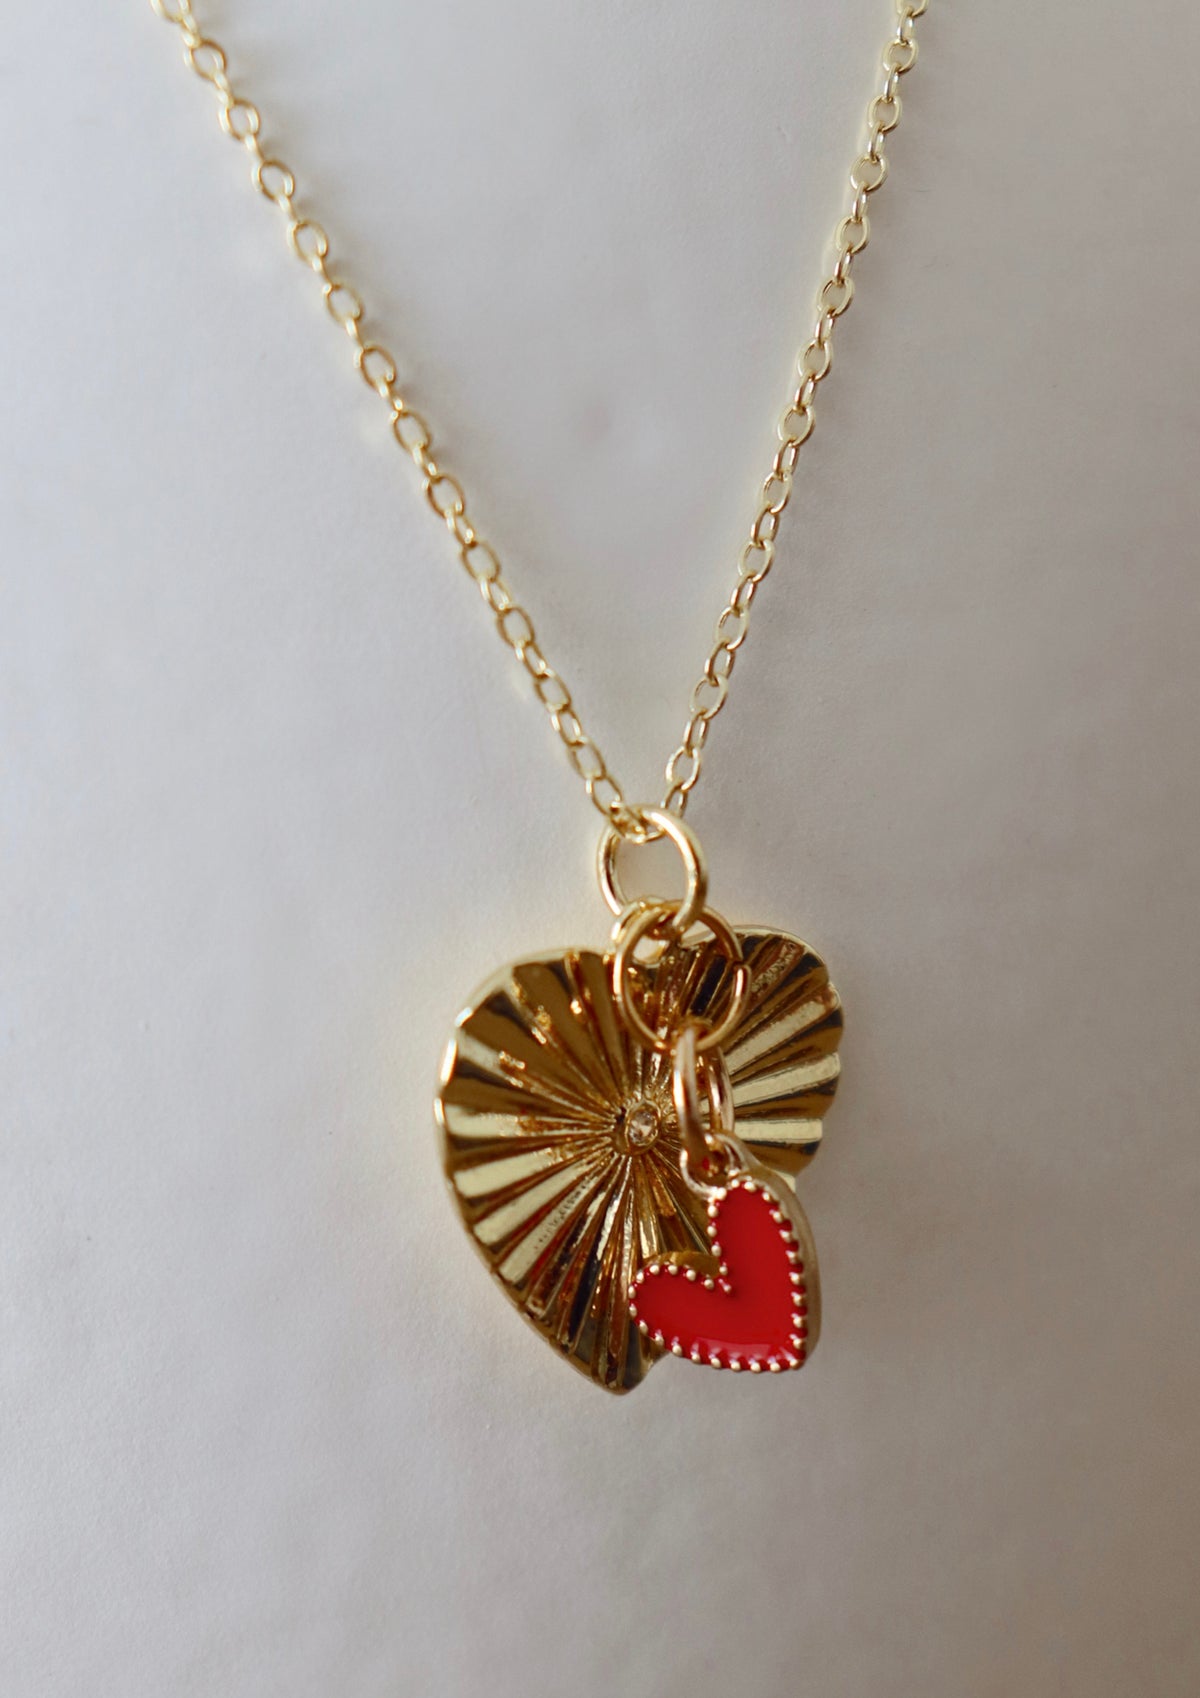 Wholeheartedly Necklace